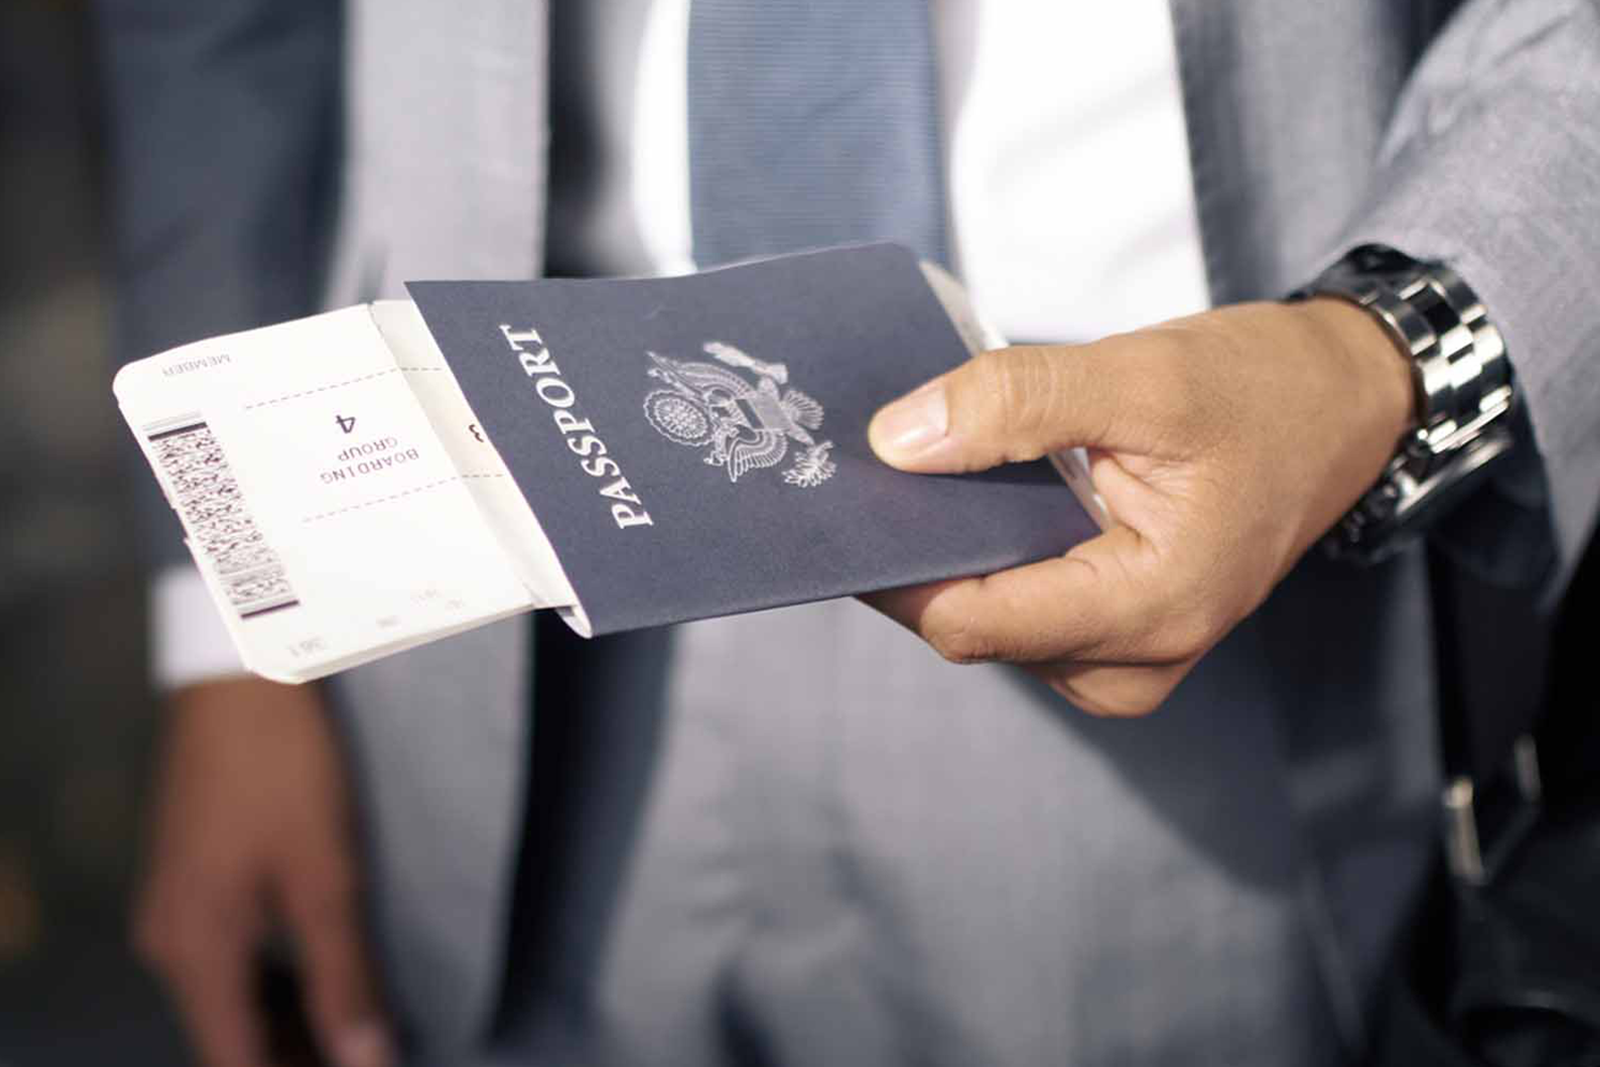 best immigration solicitors near me